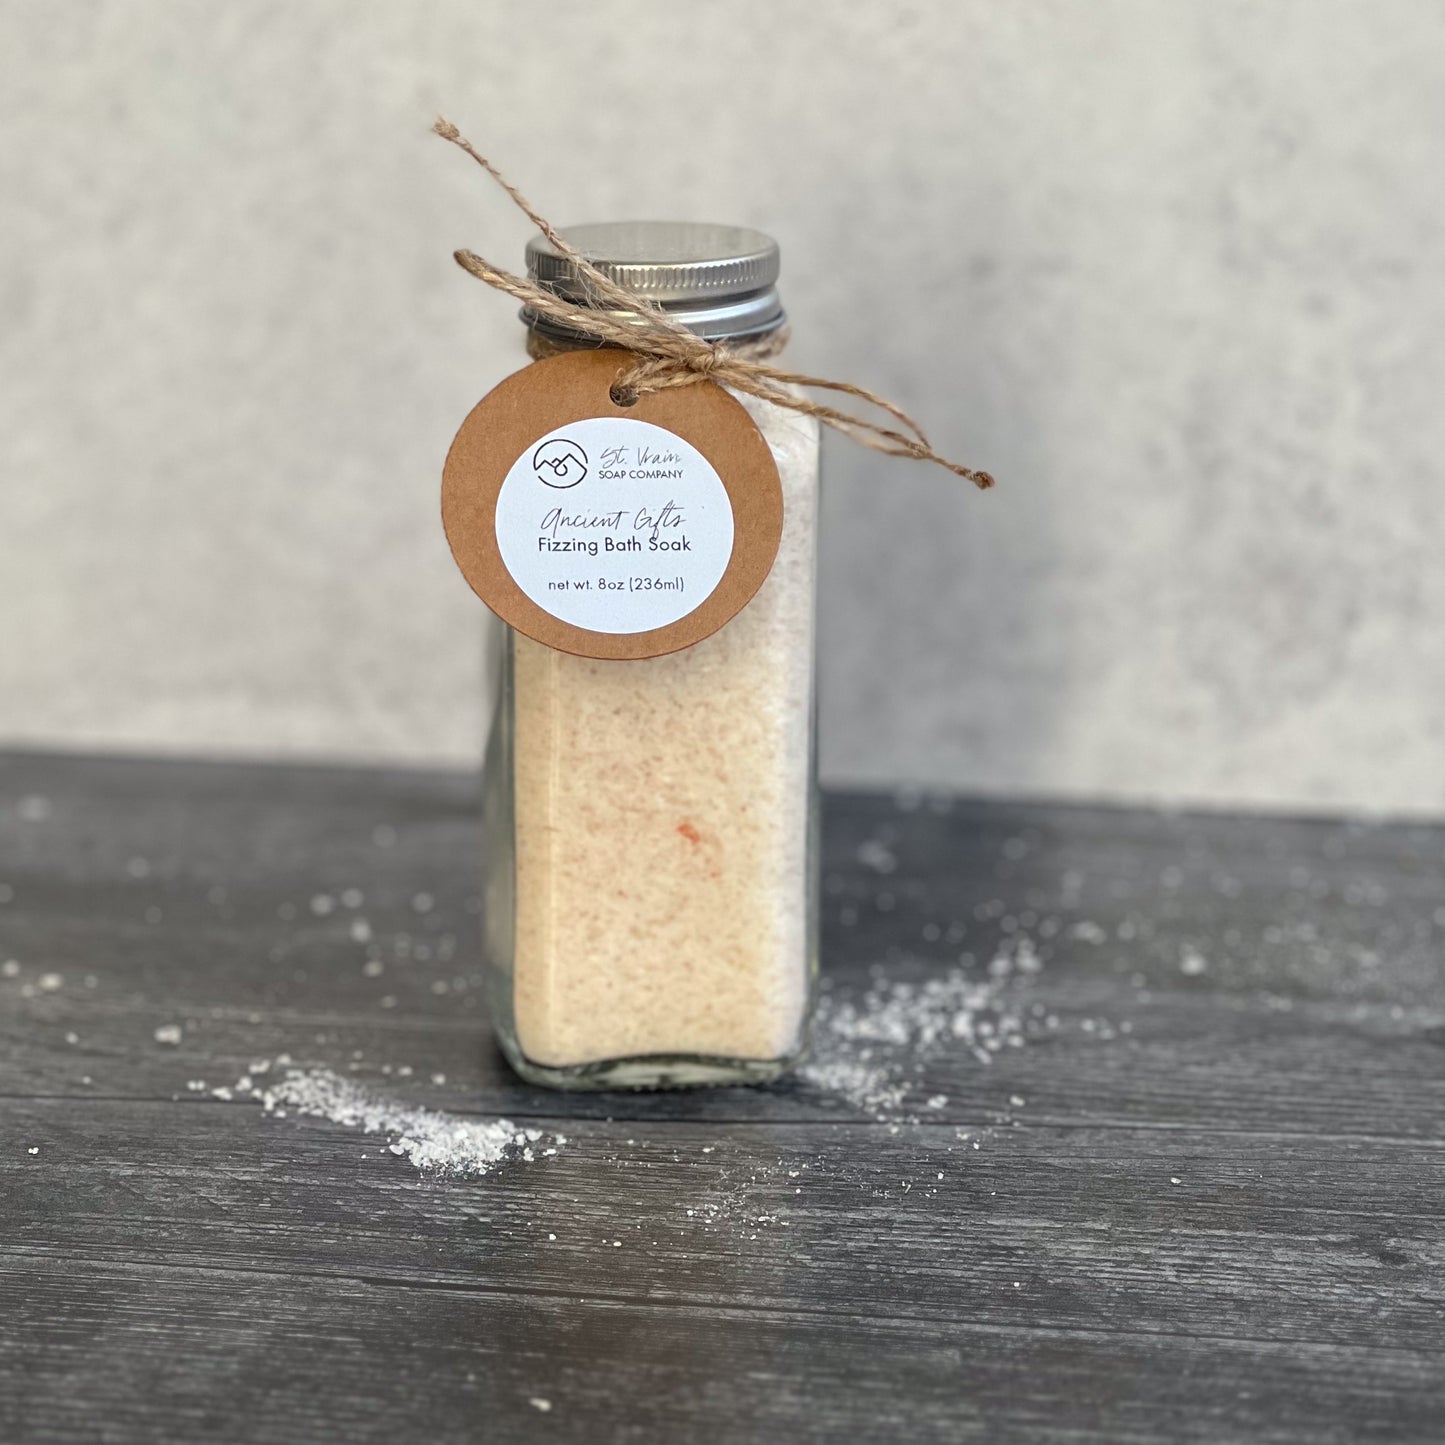 Ancient Gifts Holiday Fizzing Bath Soak